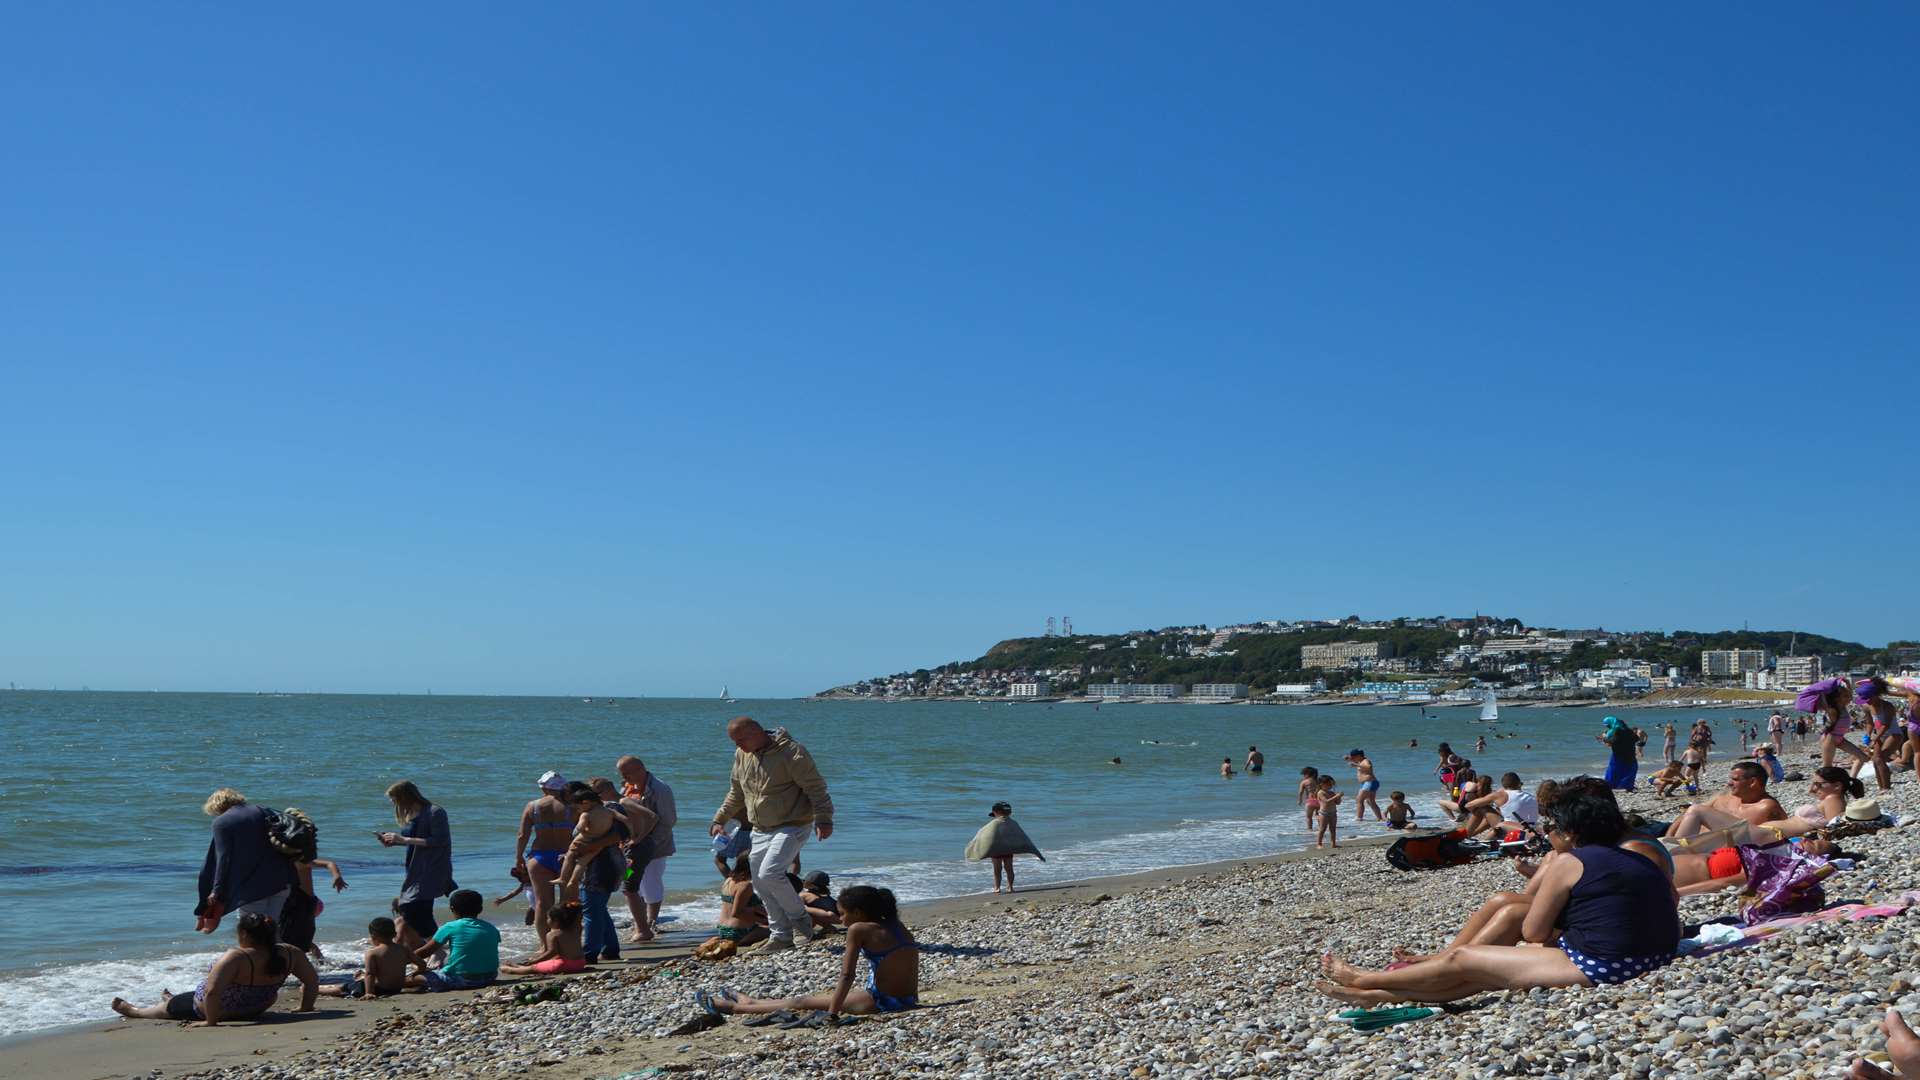 Le Havre has a stunning beach, if you're prepared to walk for it